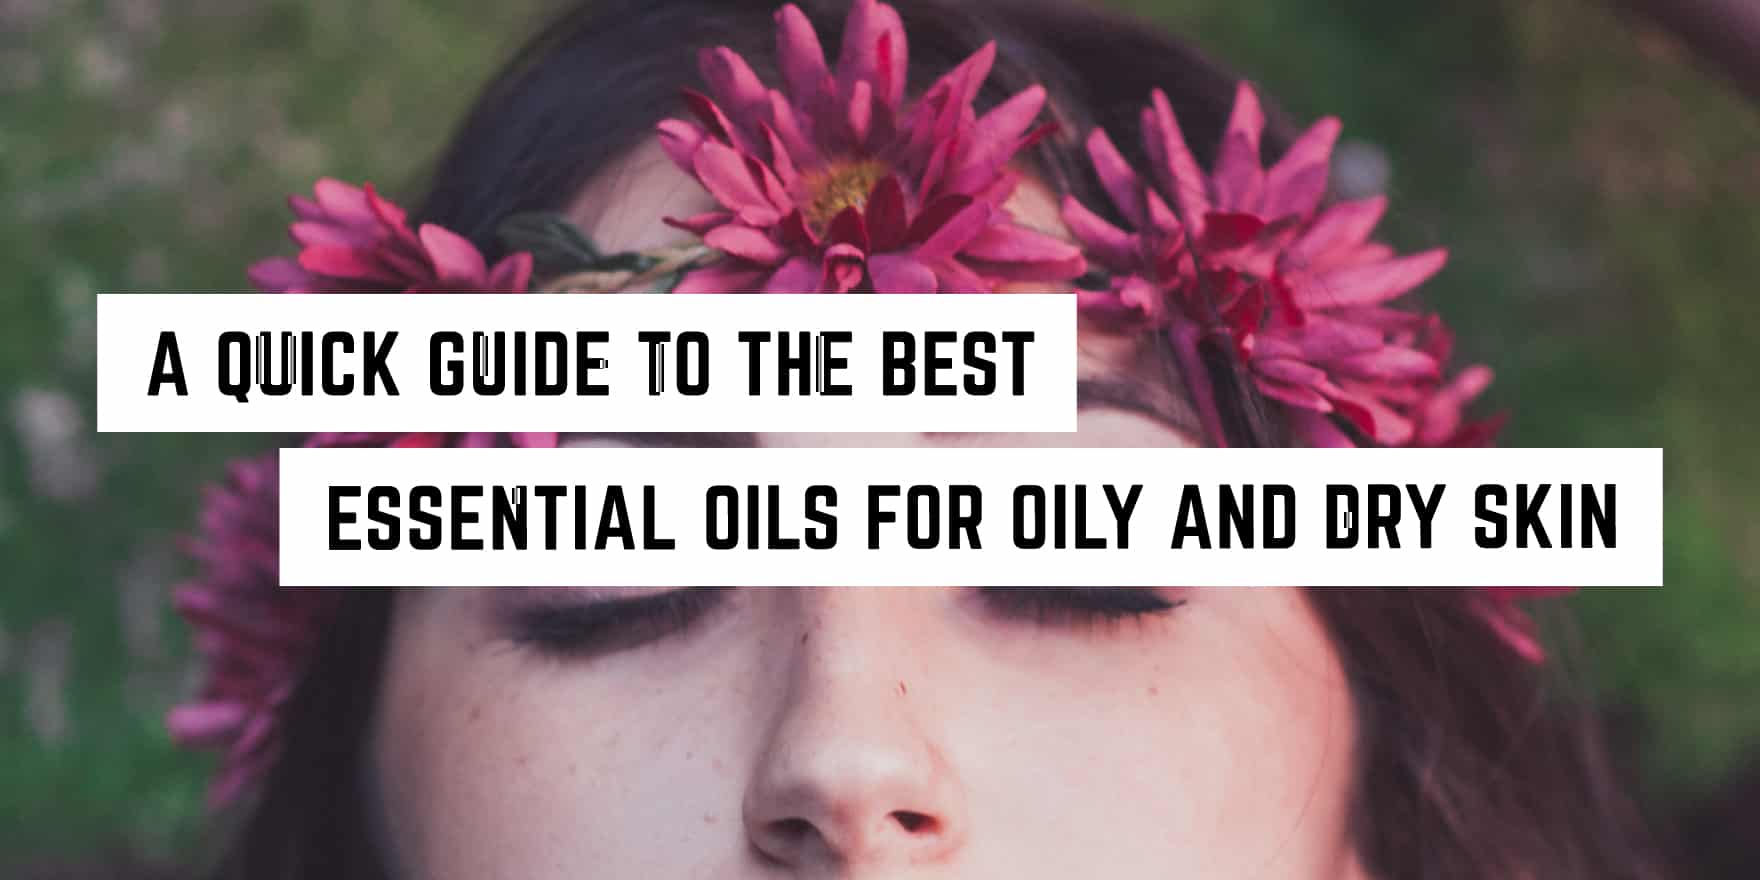 A Quick Guide to the Best Essential Oils for Oily and Dry Skin